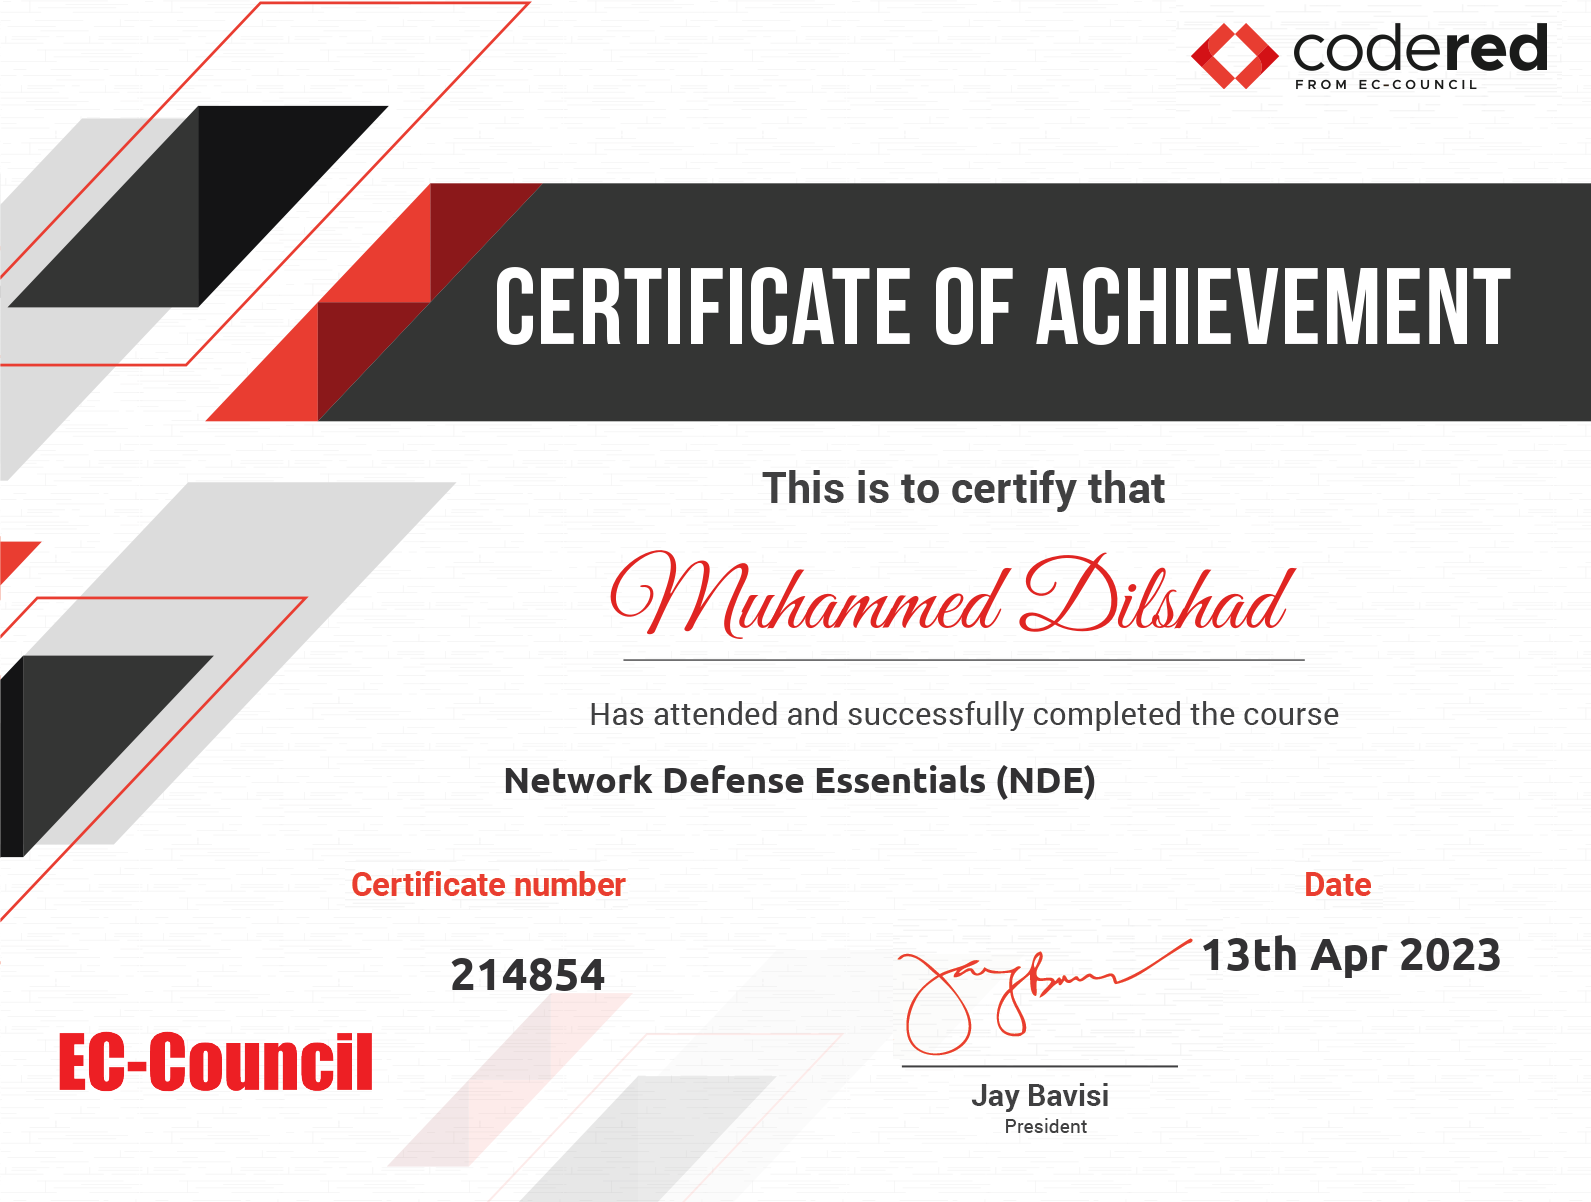 couNciL

> CERTIFICATE OF ACHIEVEMENT

This is to certify that

# O)Nlitemmed Dilstad

Has attended and successfully completed the course
Network Defense Essentials (NDE)
Certificate number Date

214854 SE Apr 2023

Jay Bavisi

President